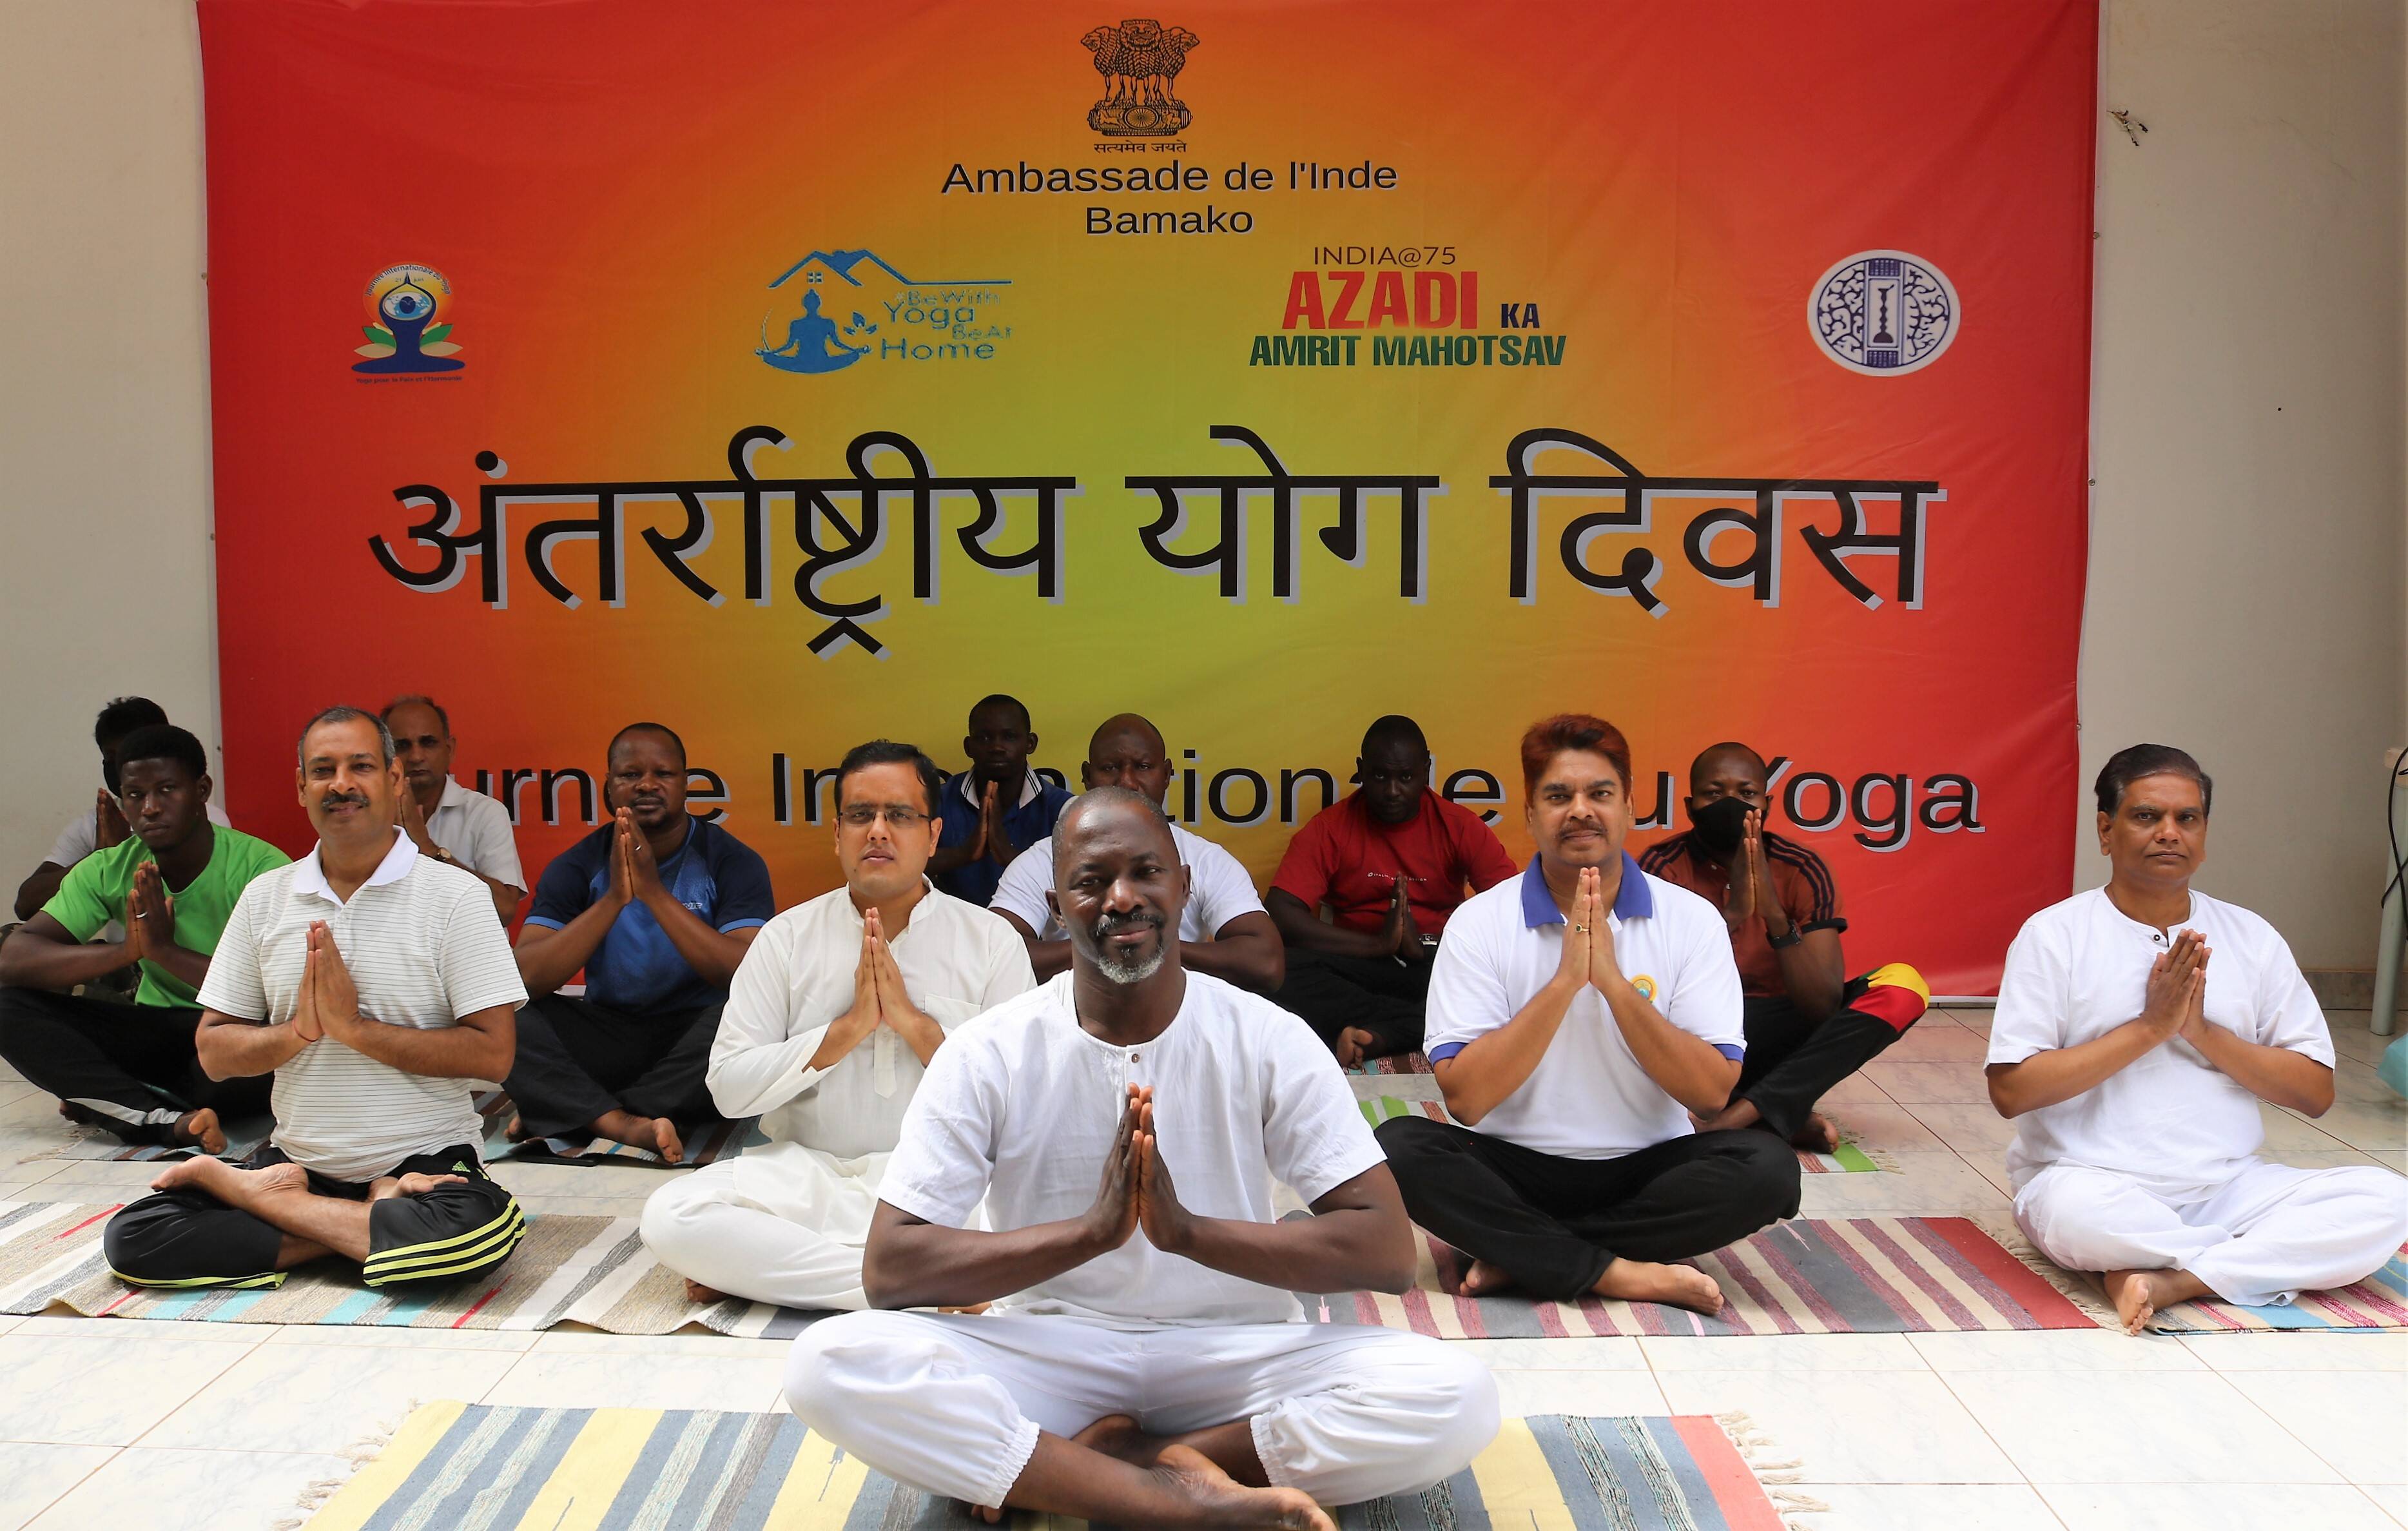 The practise of Yoga is growing in Mali as more and more people are getting exposed to its benefits. (Image Courtesy: Embassy of India, Mali)